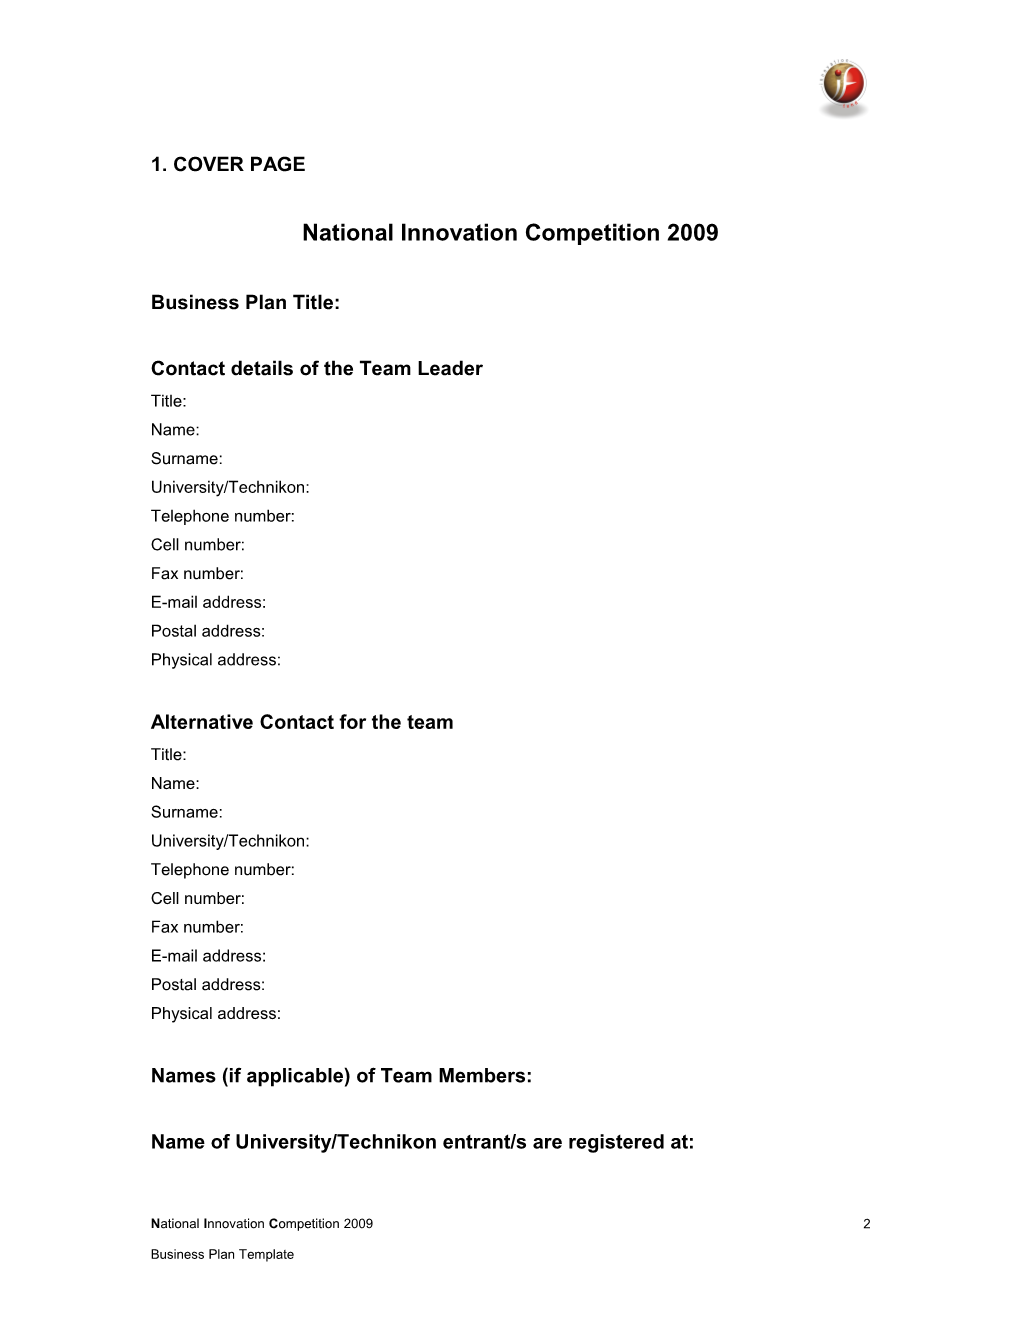 National Innovation Competition Template 2009